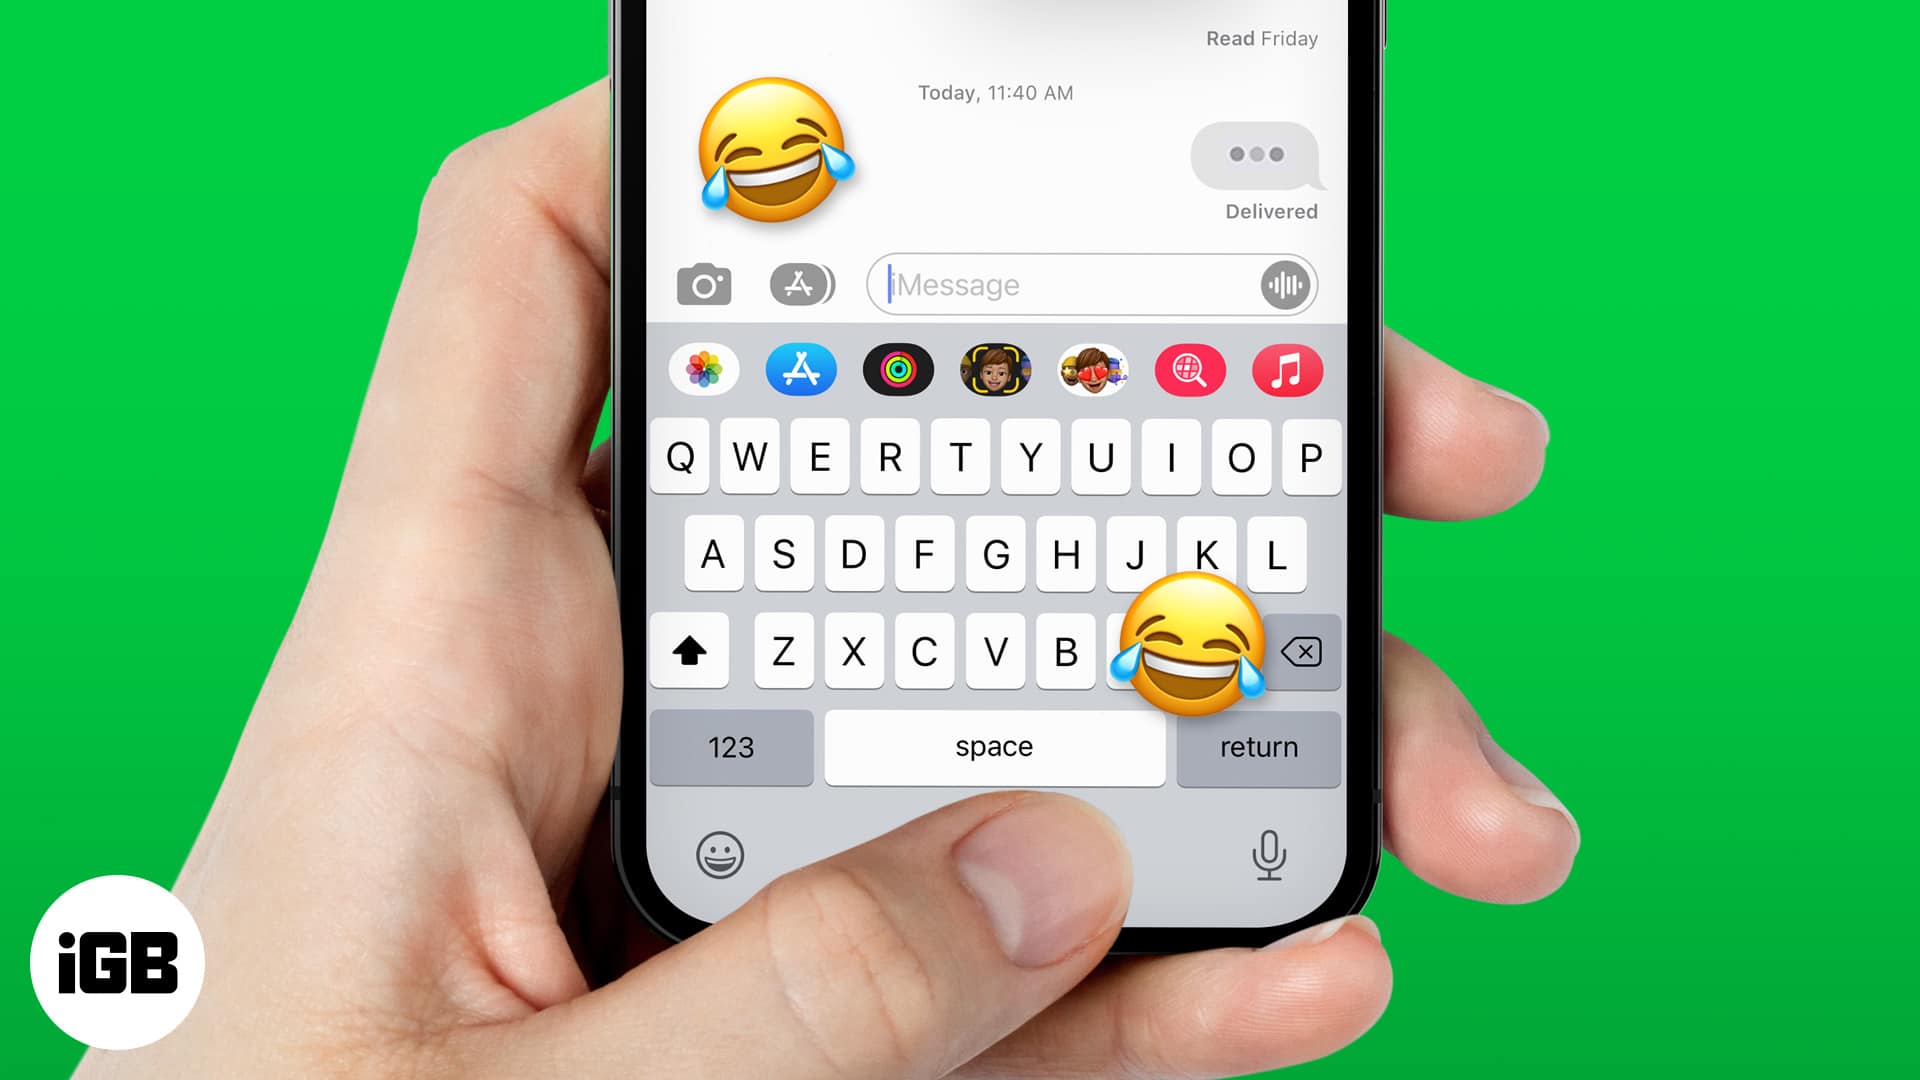 Cool imessage typing gif prank on iphone